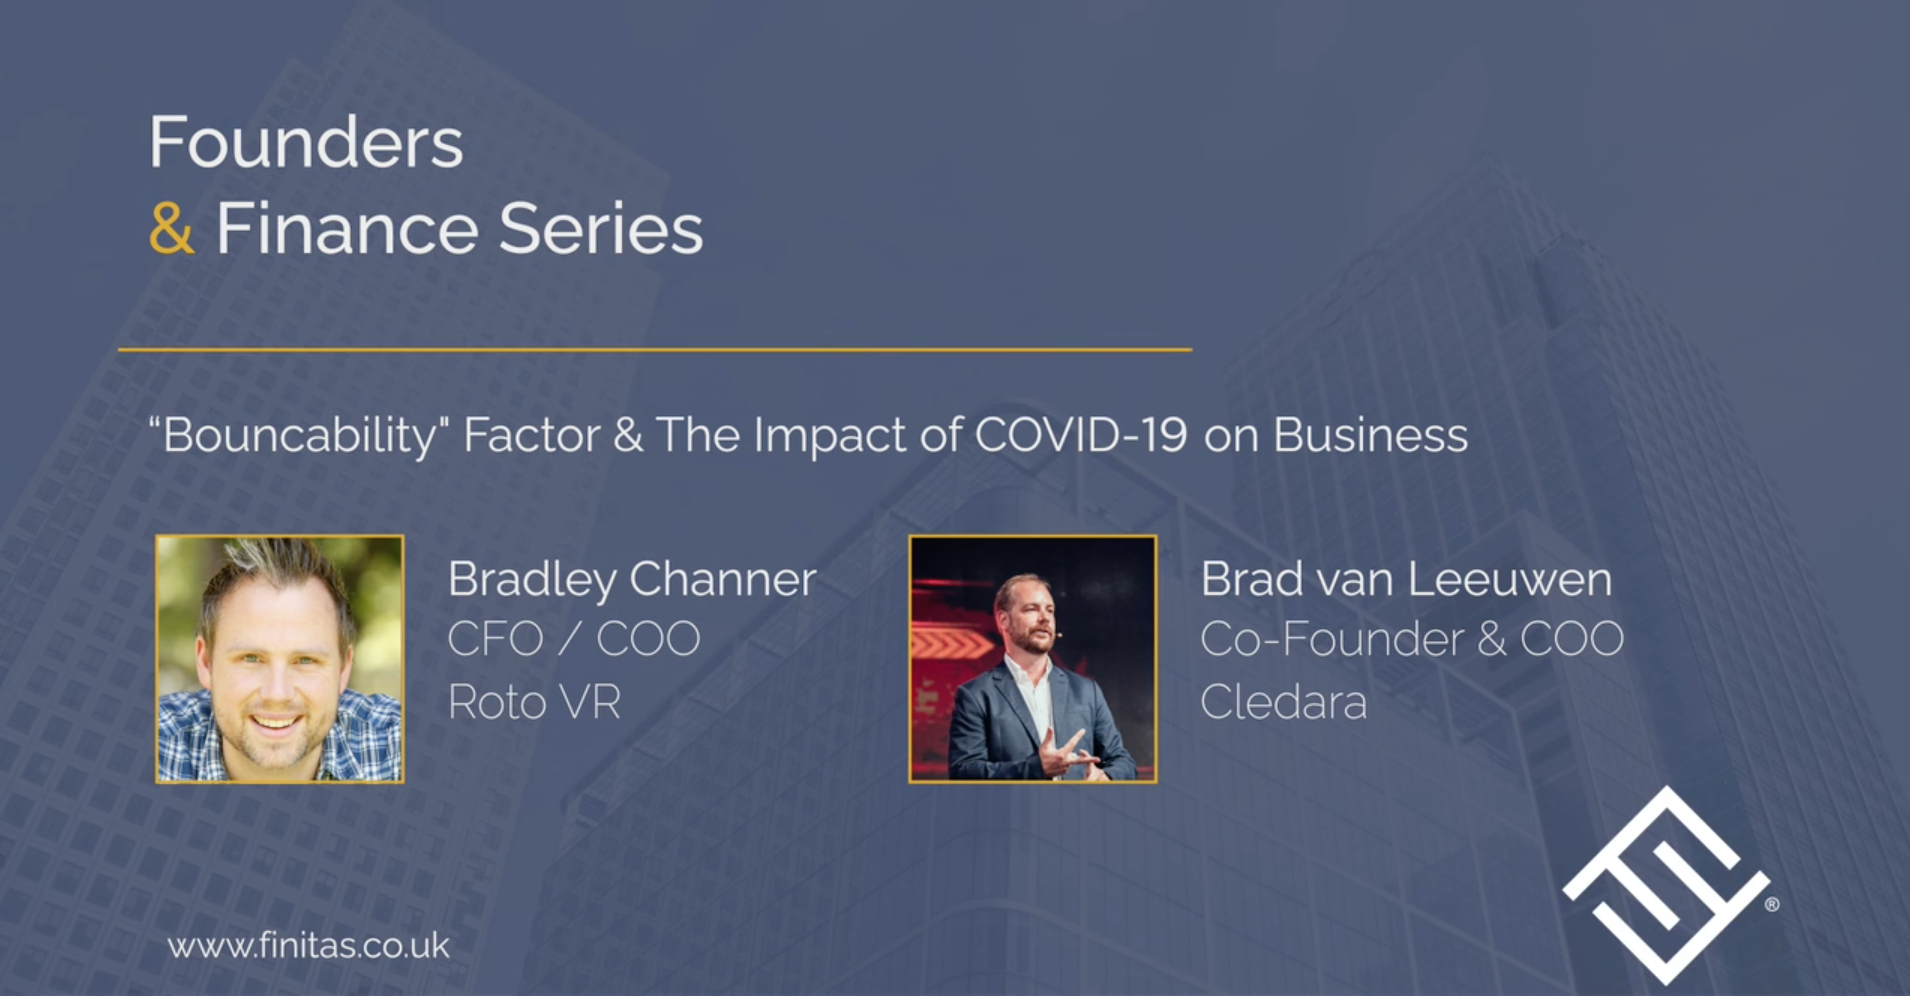 Founders & Finance Series - 'Bouncability' Factor & The Impact of COVID-19 on Business